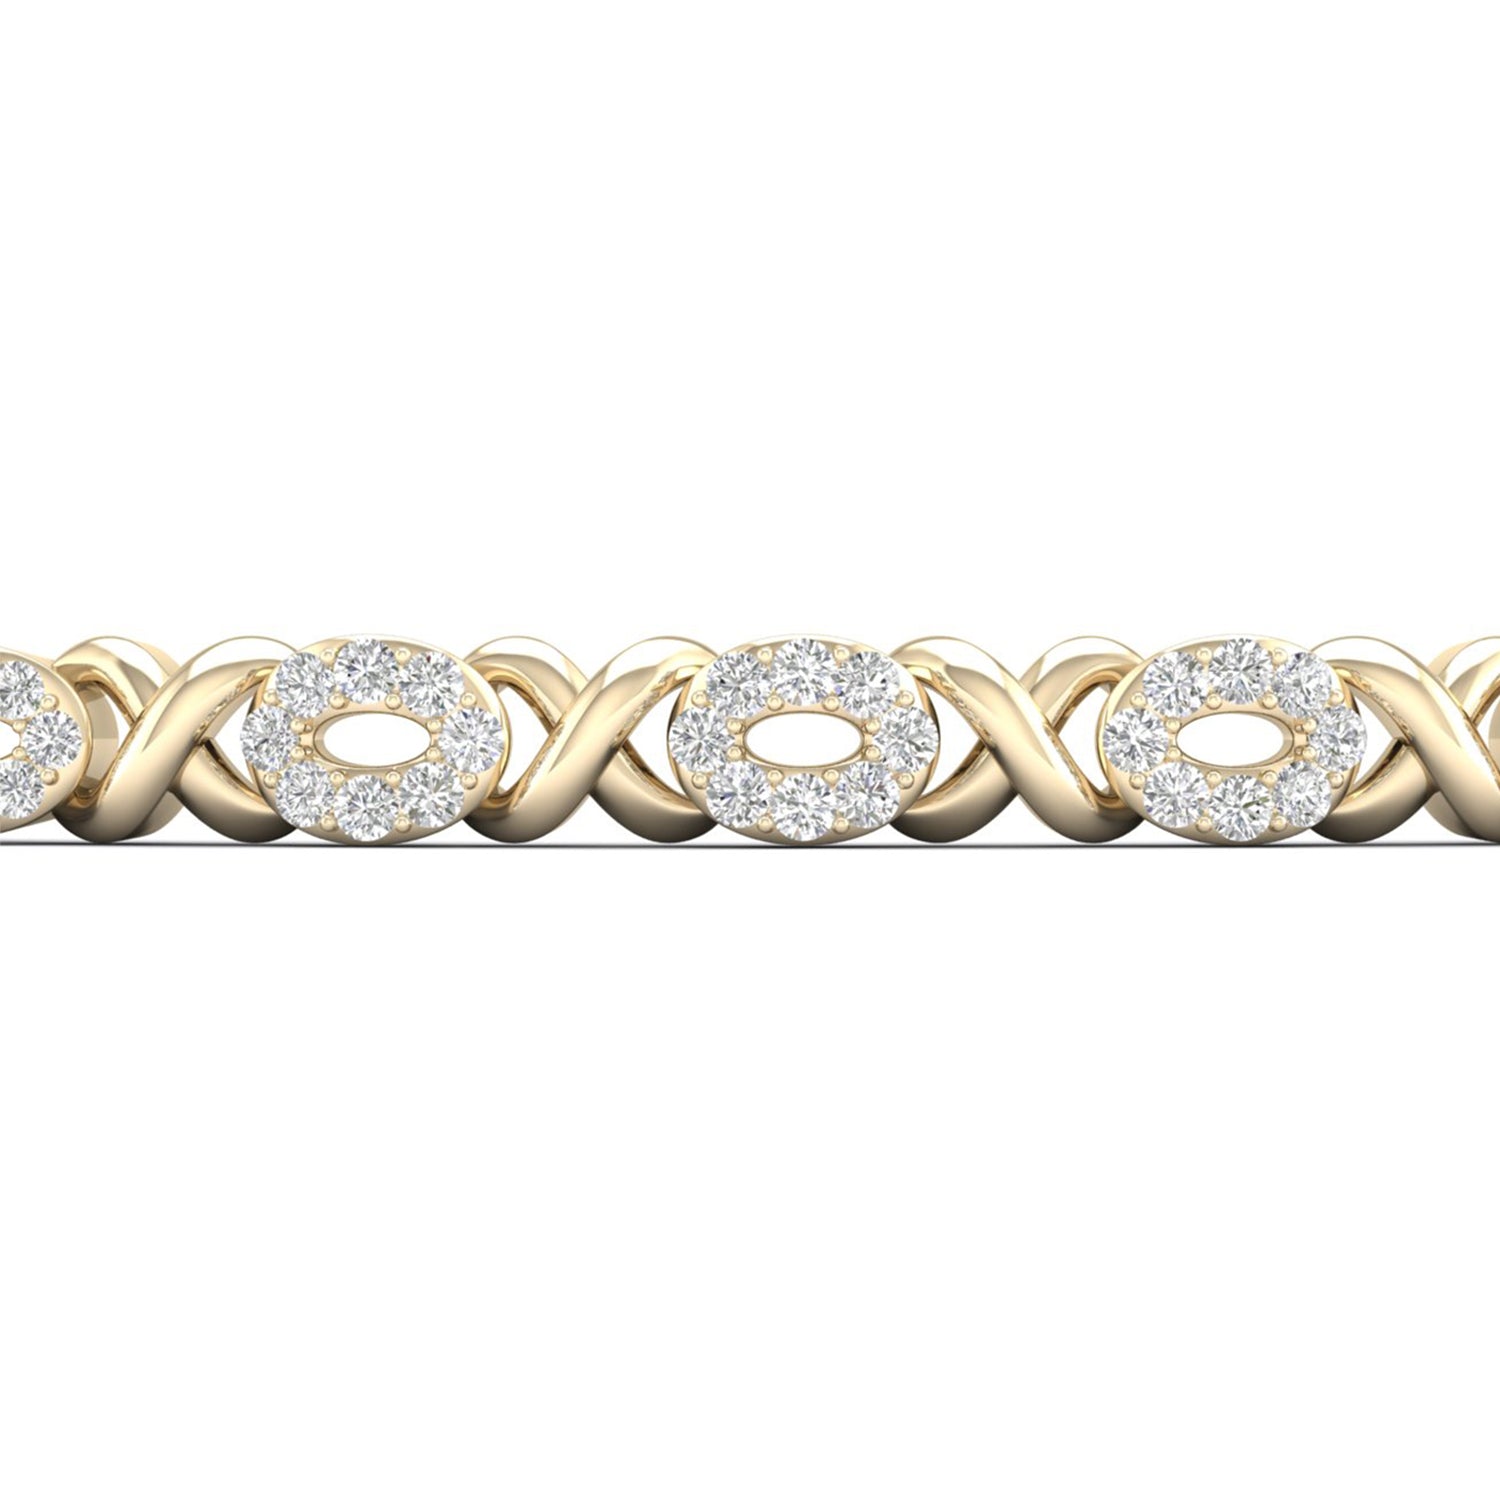 Darling Bolo Bracelet_Product Angle_1/4 Ct. - 1